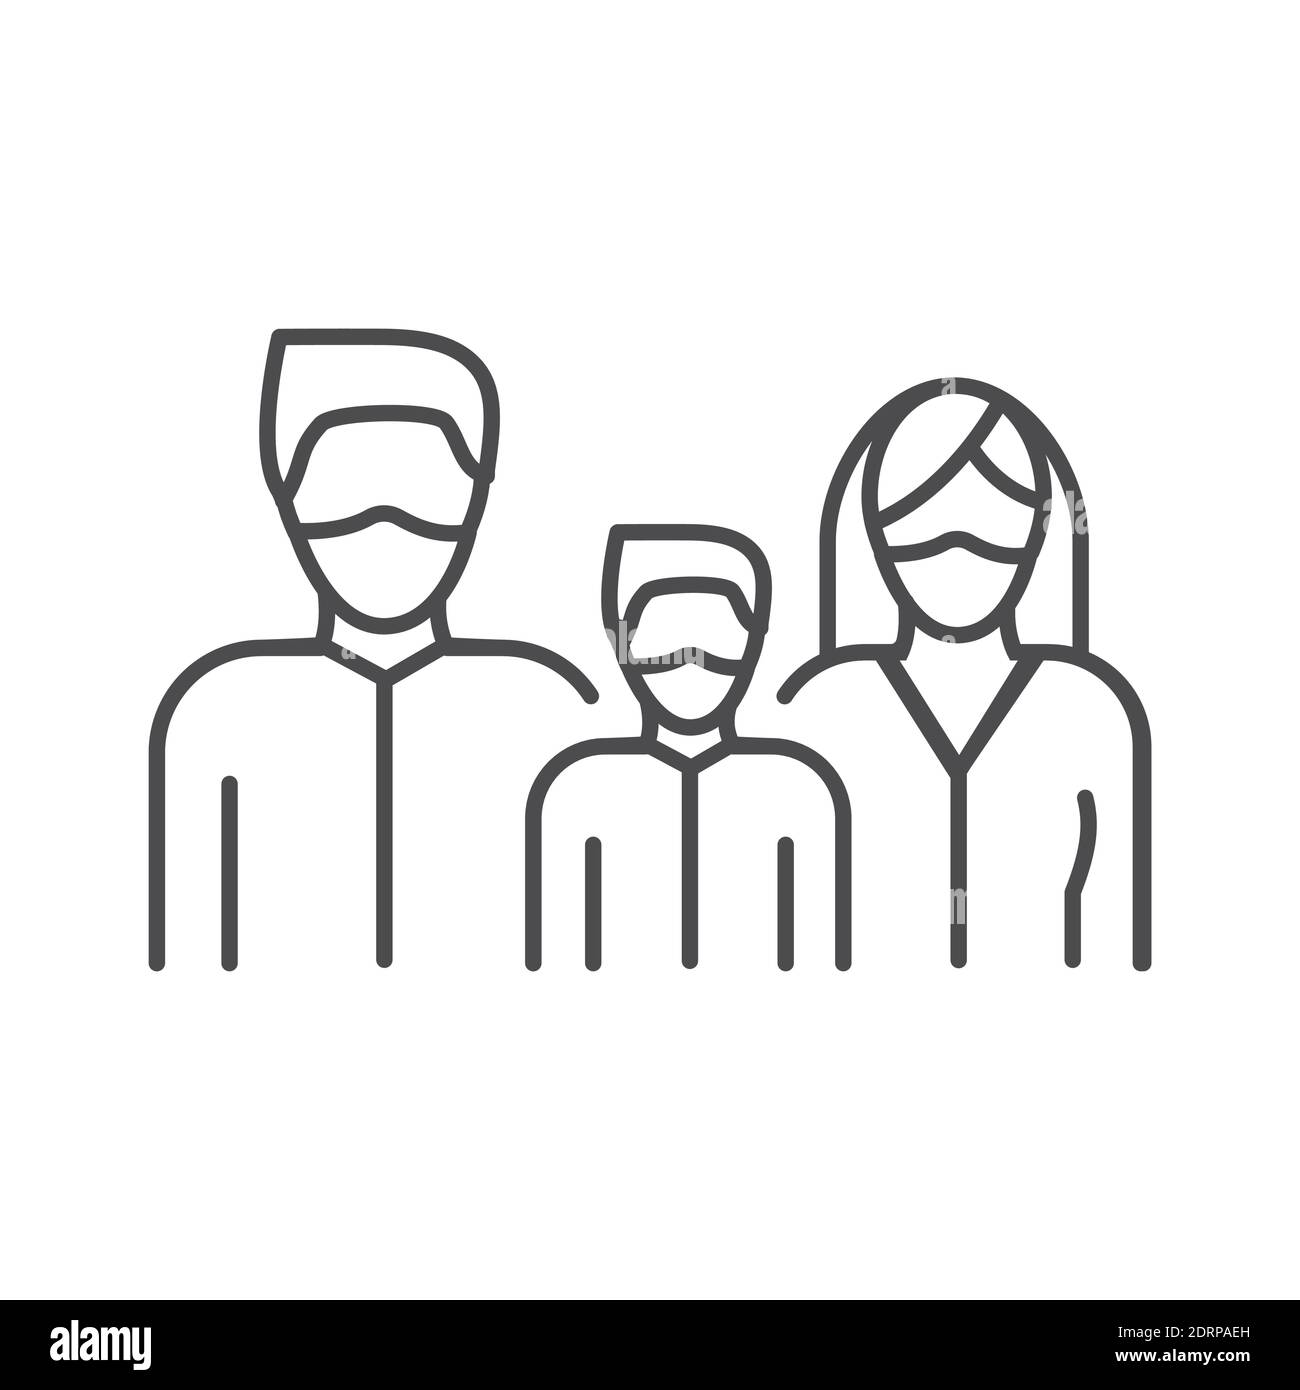 Protection family line color icon. Sign for web page, mobile app, button, logo. Stock Vector